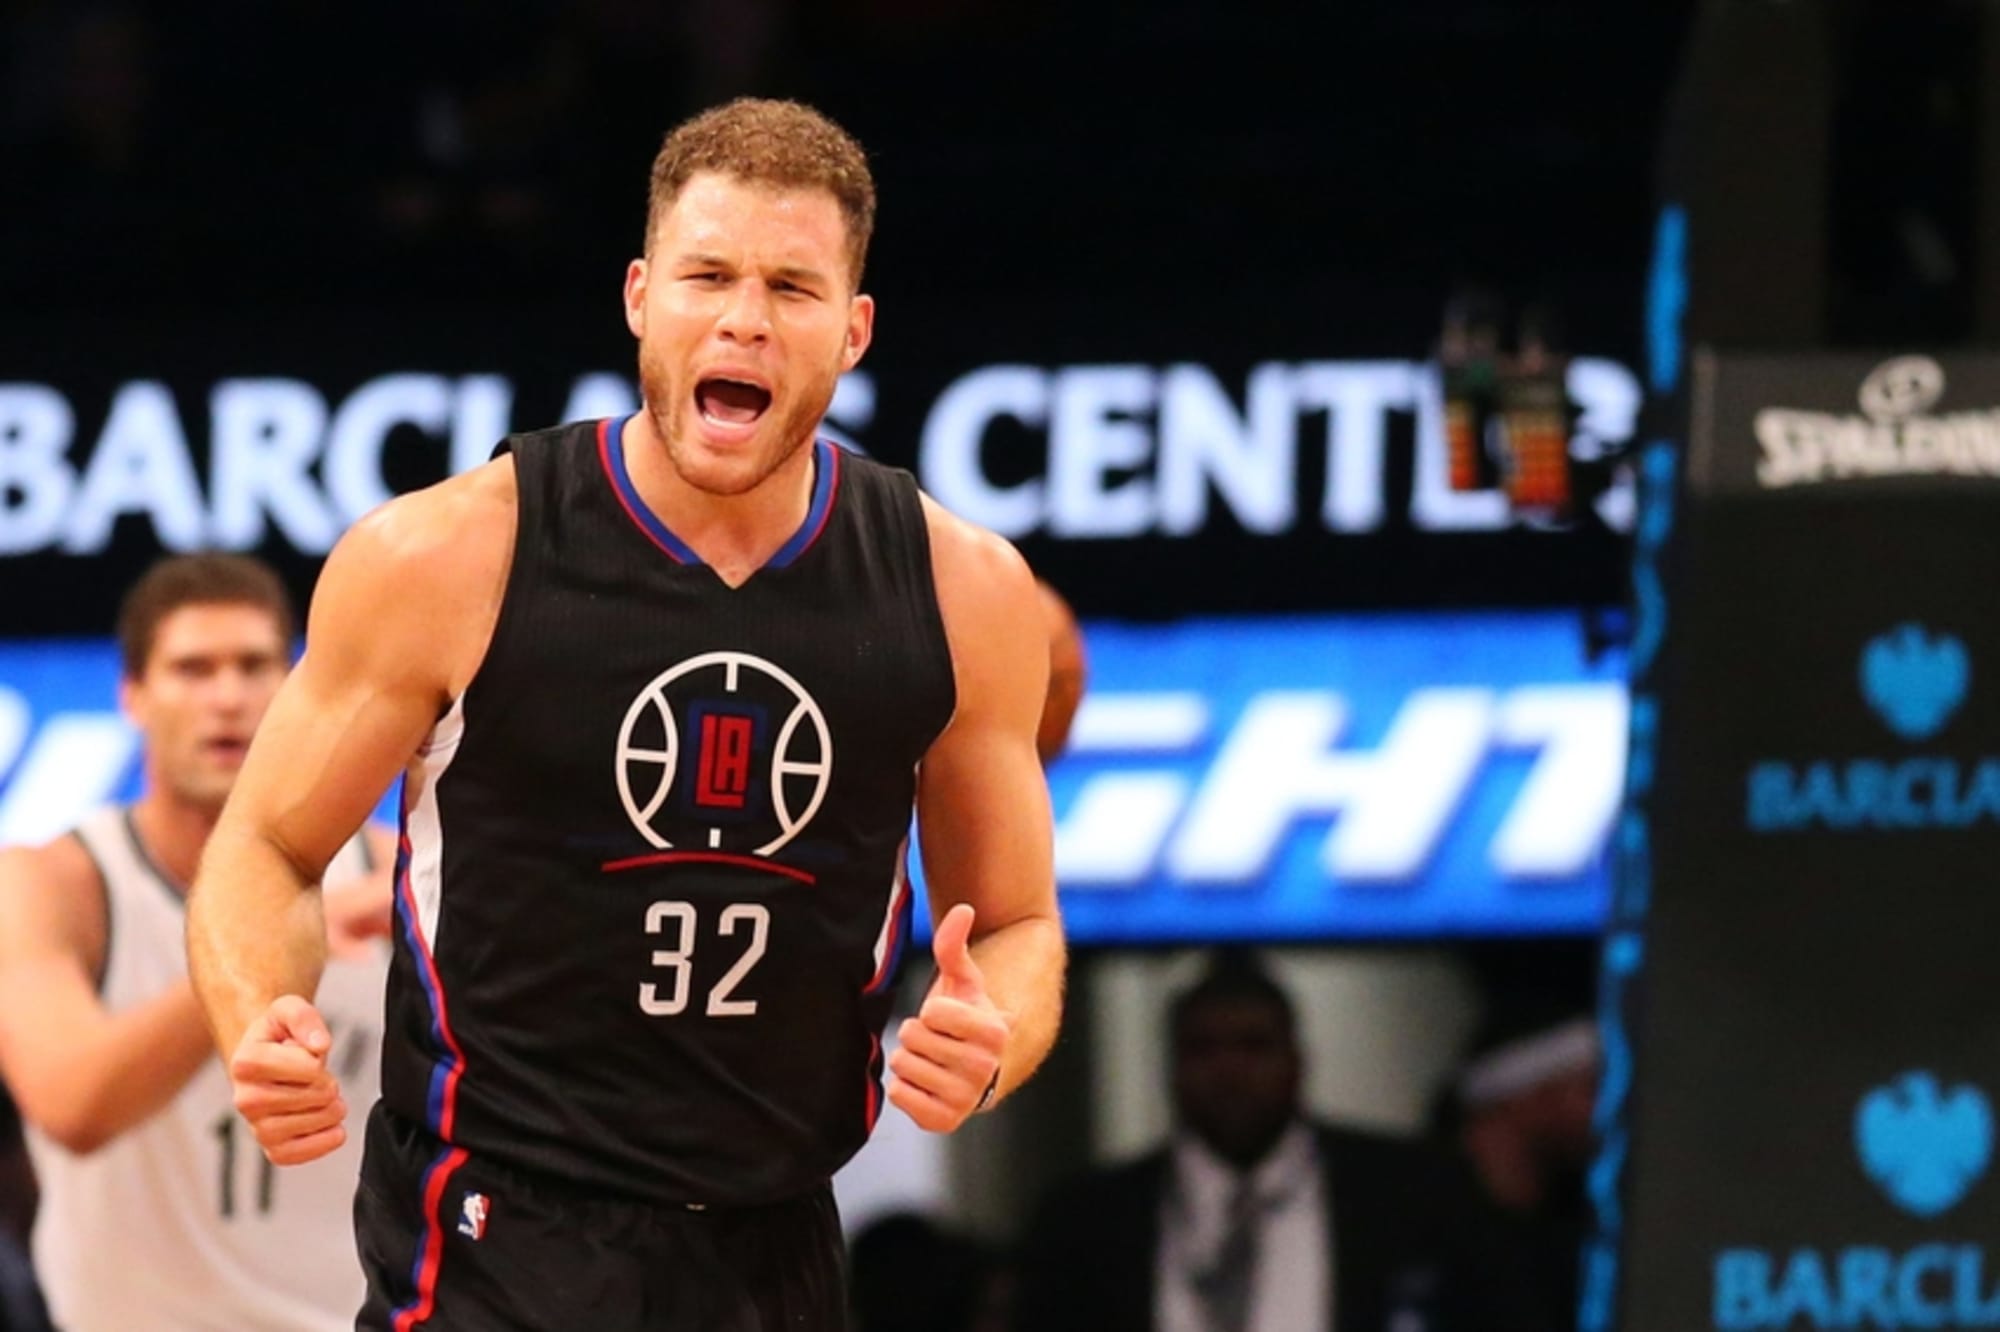 L.A. Clippers: Don't Trade Blake Griffin For LeBron James